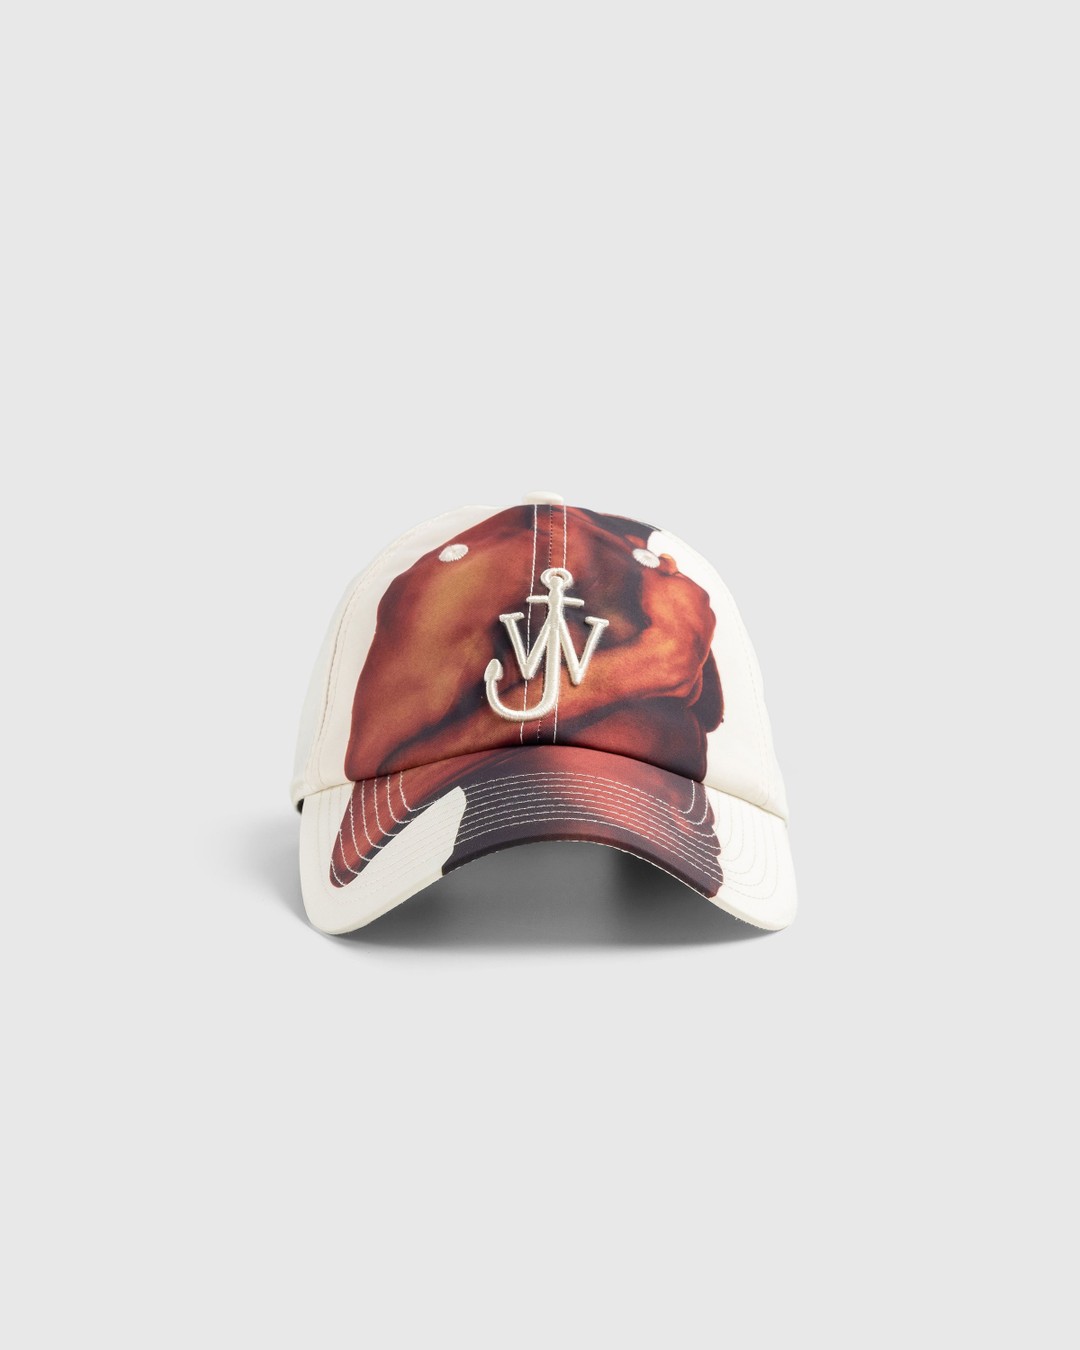 J.W. Anderson – Logo Embroidered Baseball Cap Off White - Hats - White - Image 2